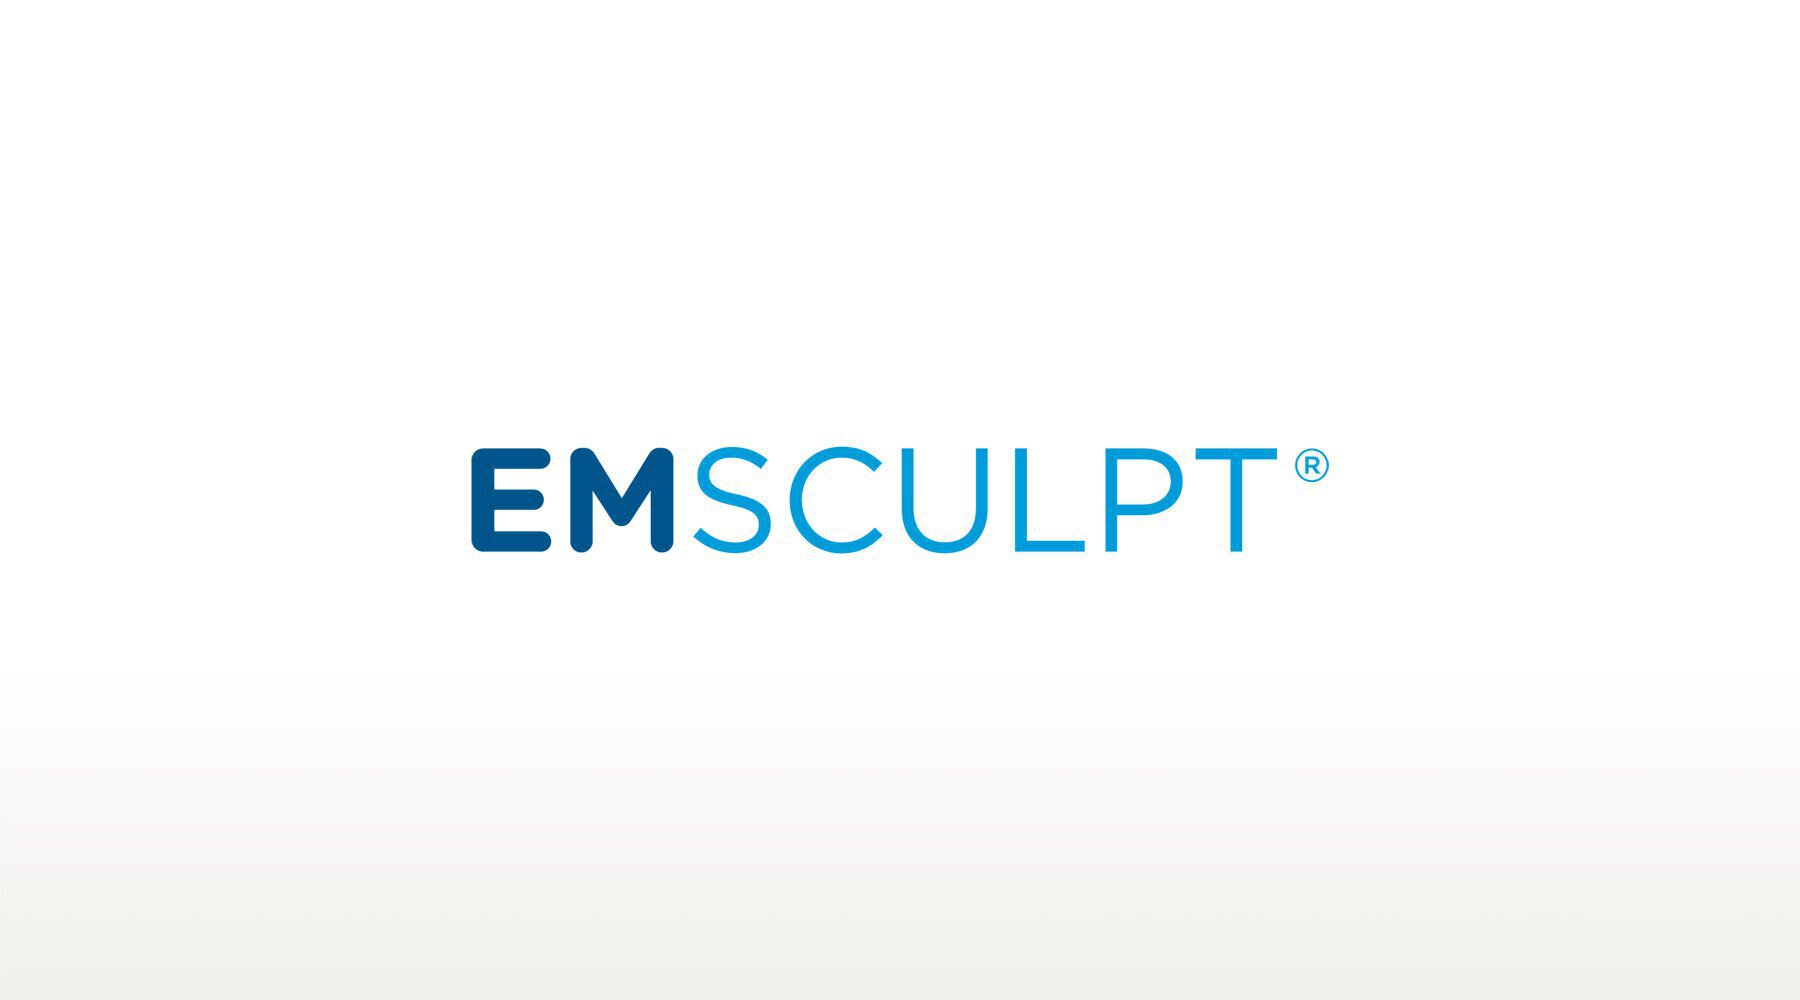 Everything You Need To Know About EmSculpt®